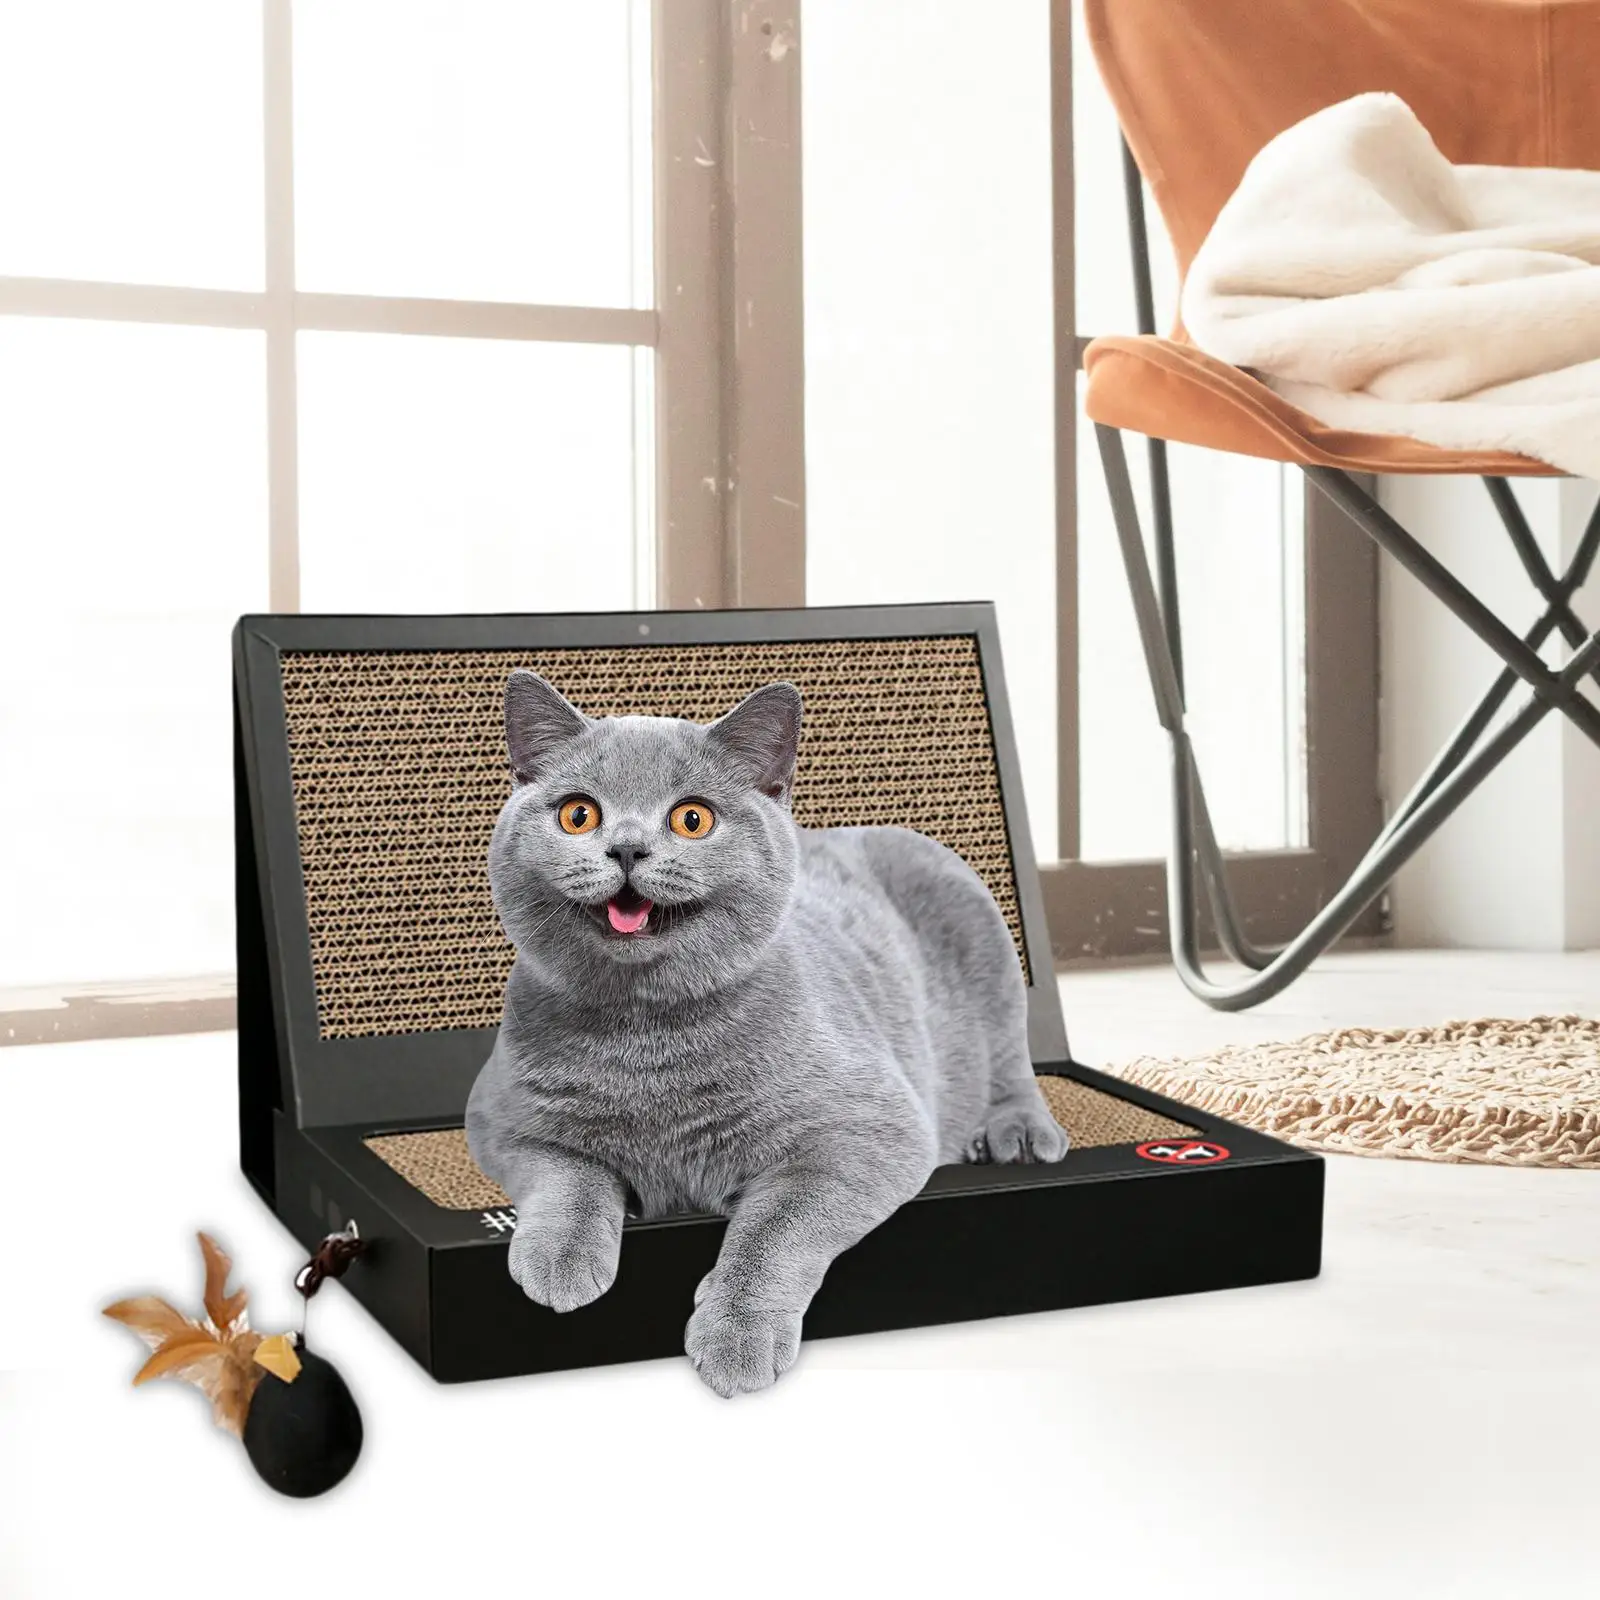 Cat Scratching Board Prevents Furniture Damage Interactive Toy Cat Scratcher Cardboard for Small Medium Large Cats Pet Supplies